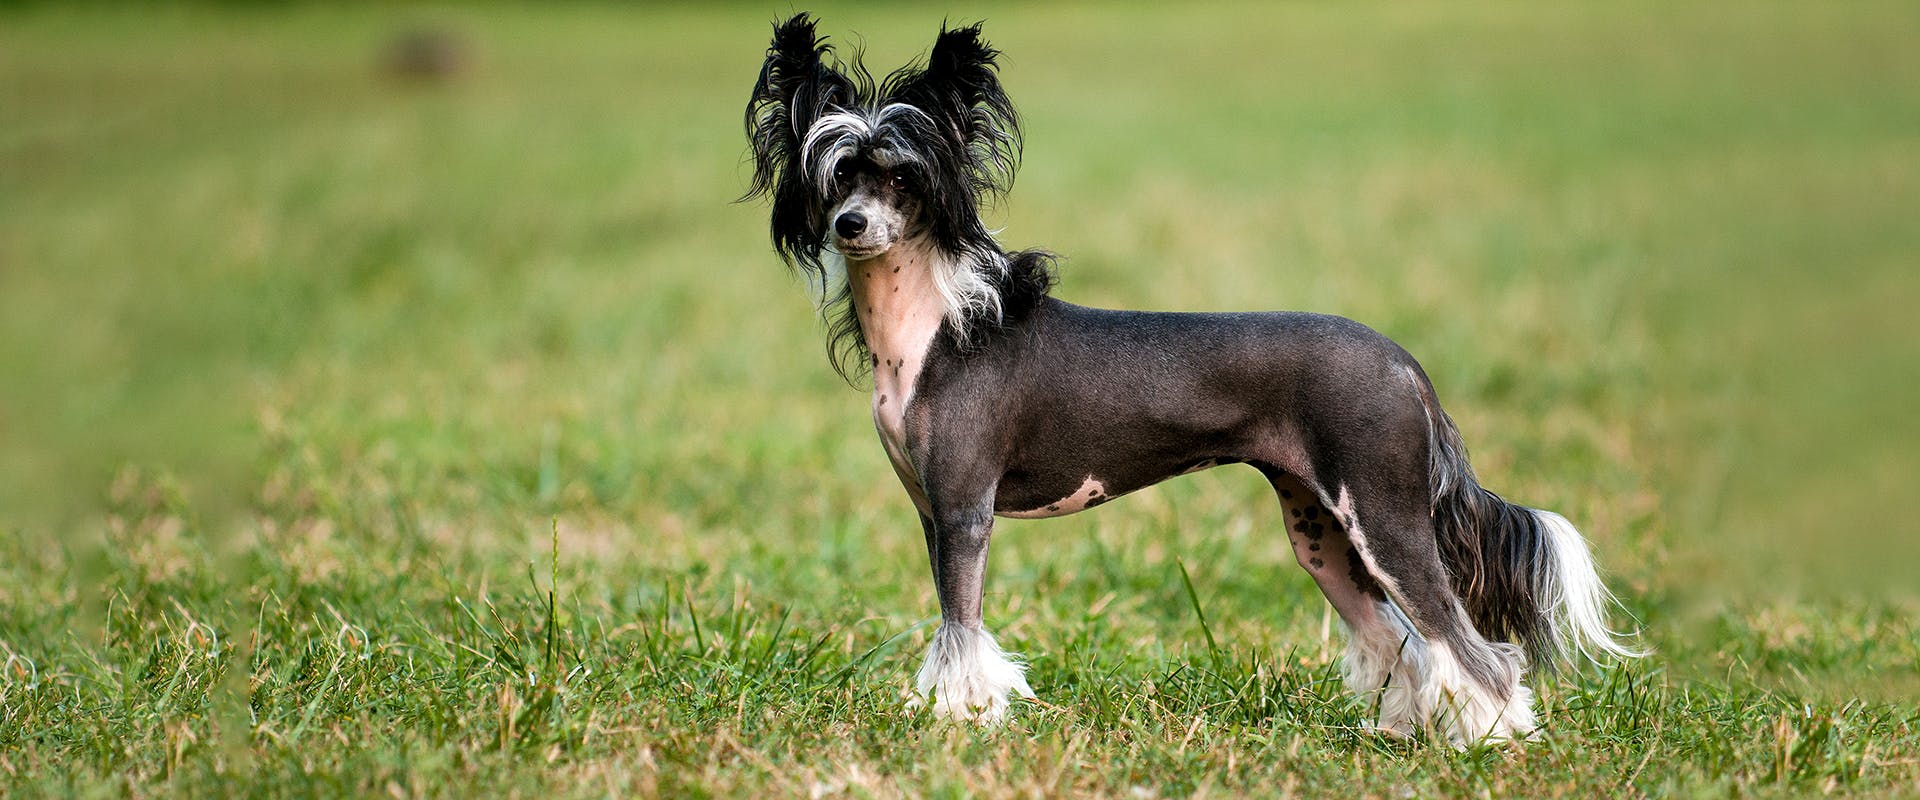 A black and white Chinese Crested dog standing in a field of green grass